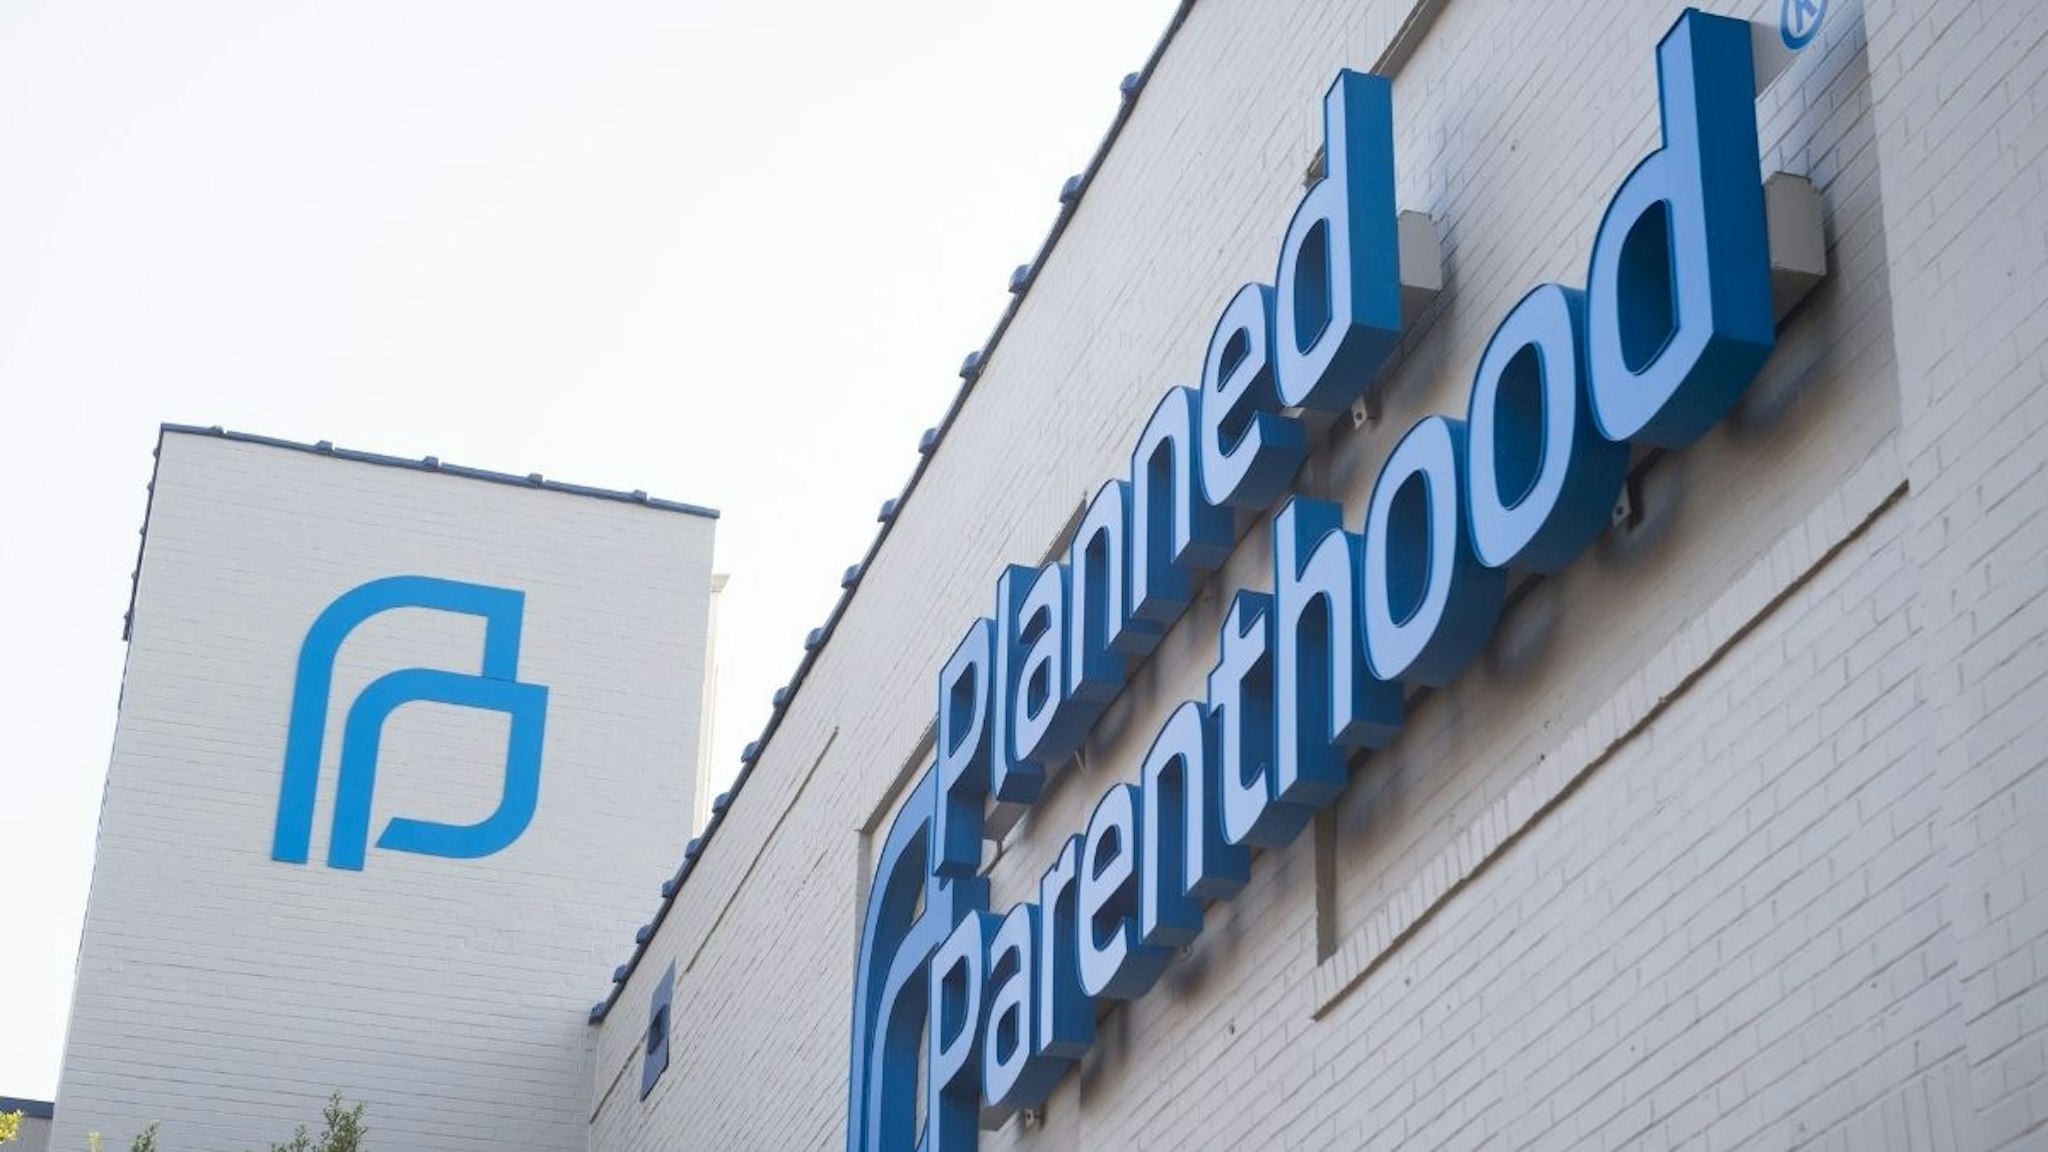 The outside of the Planned Parenthood Reproductive Health Services Center is seen in St. Louis, Missouri, May 31, 2019, the last location in the state performing abortions. - A US court weighed the fate of the last abortion clinic in Missouri on May 30, with the state hours away from becoming the first in 45 years to no longer offer the procedure amid a nationwide push to curtail access to abortion.